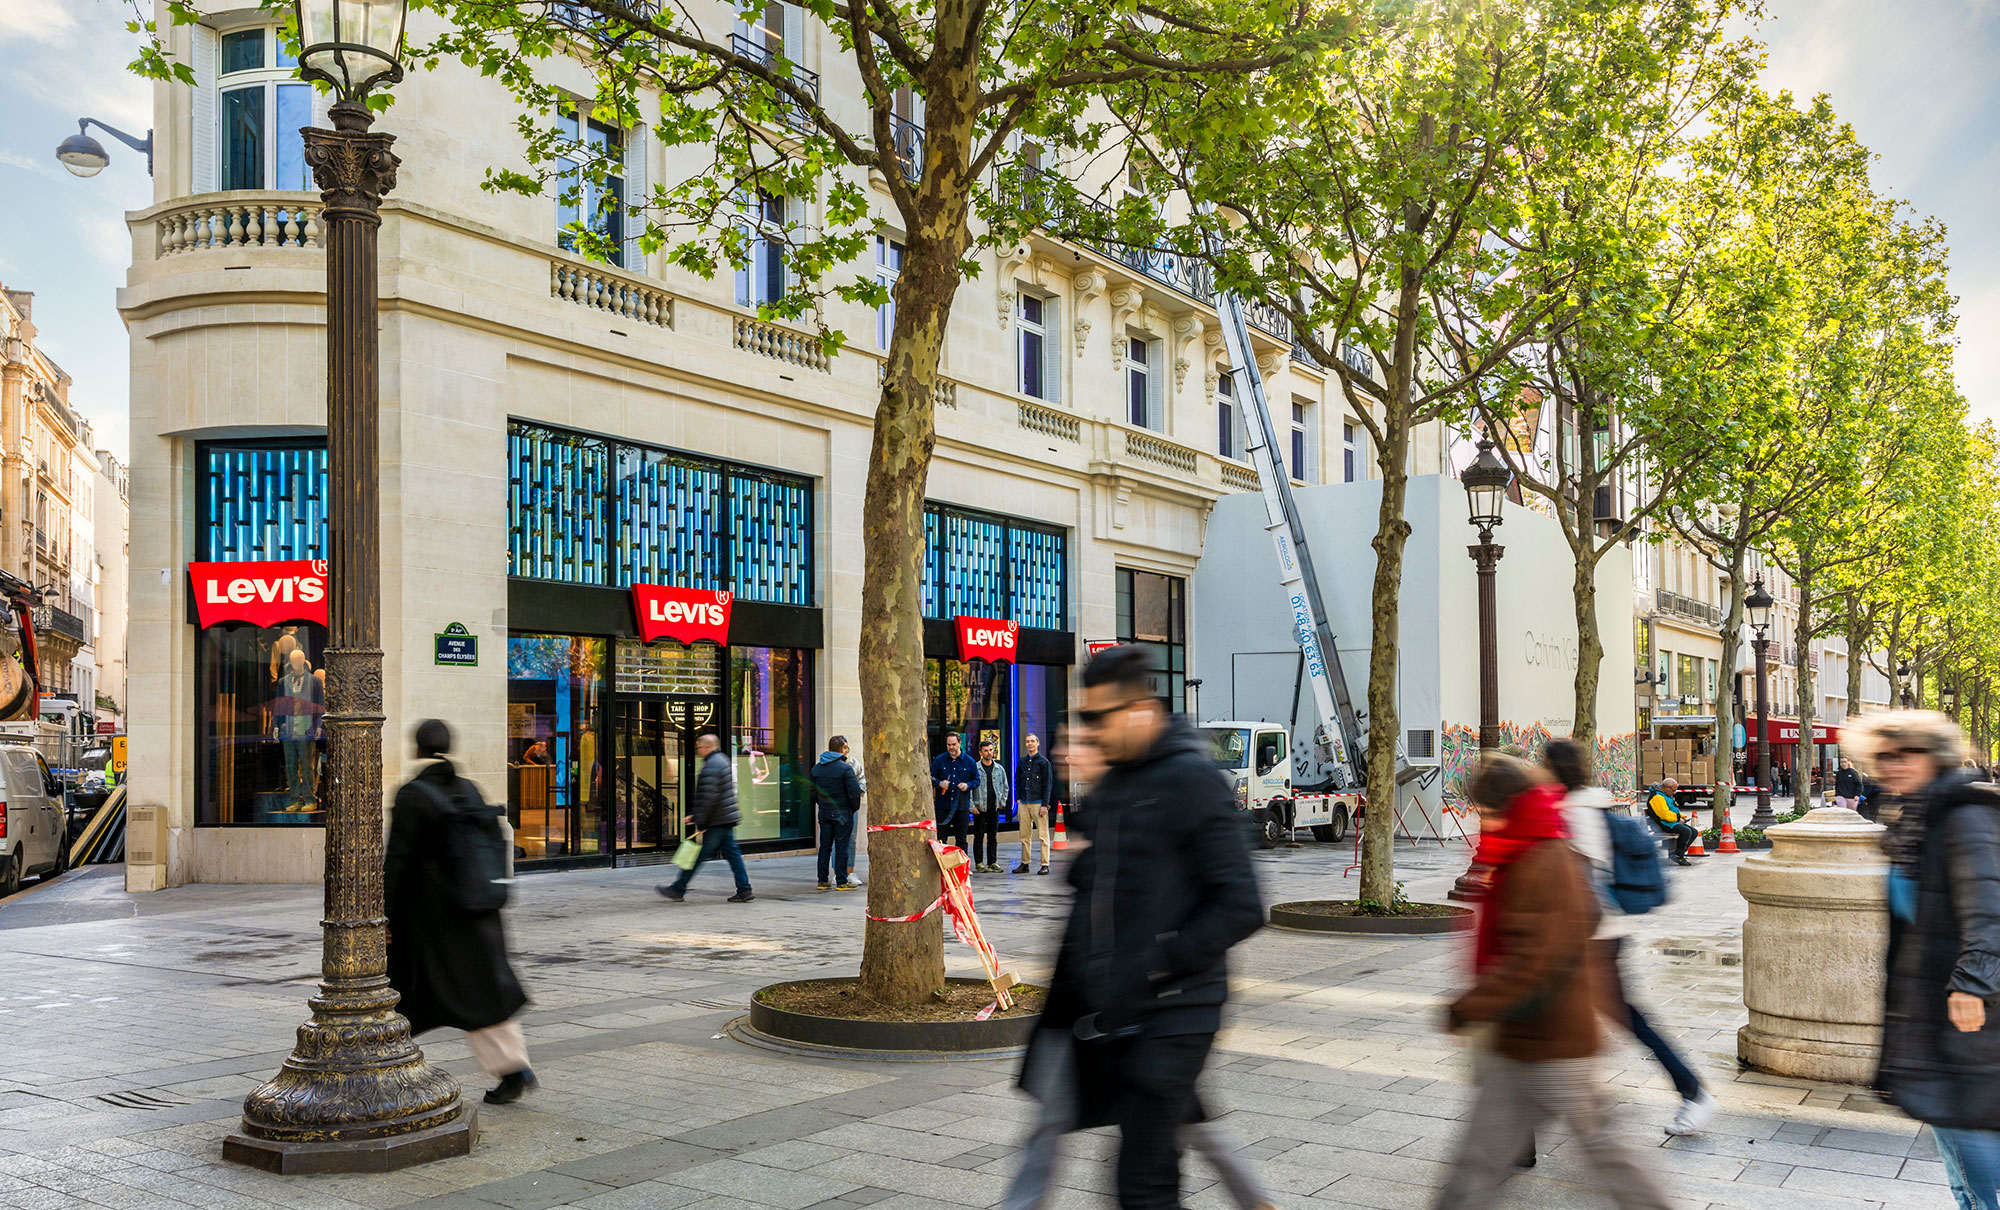 The exterior of the new Levi's® flagship store in Paris, Levi's® Champs-Élysées. A cream colored Parisian style building with large windows and the red Levi's® batwing logo placed throughout. Trees line the sidewalk and people walk around.